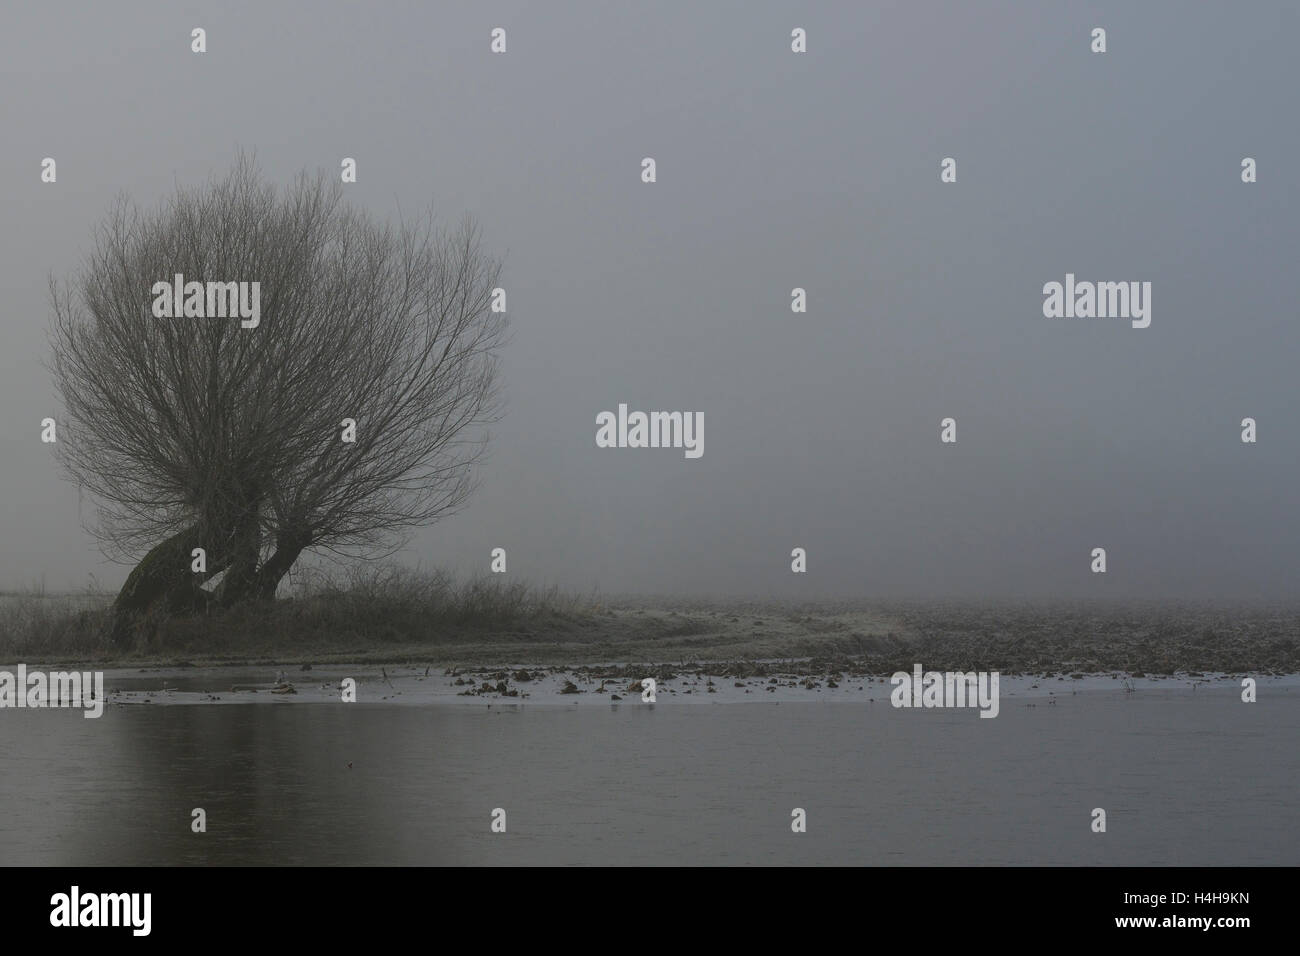 Flooded fields with old pollard trees on a typical misty gray winter morning at Lower Rhine, North Rhine-Westphalia, Germany. Stock Photo